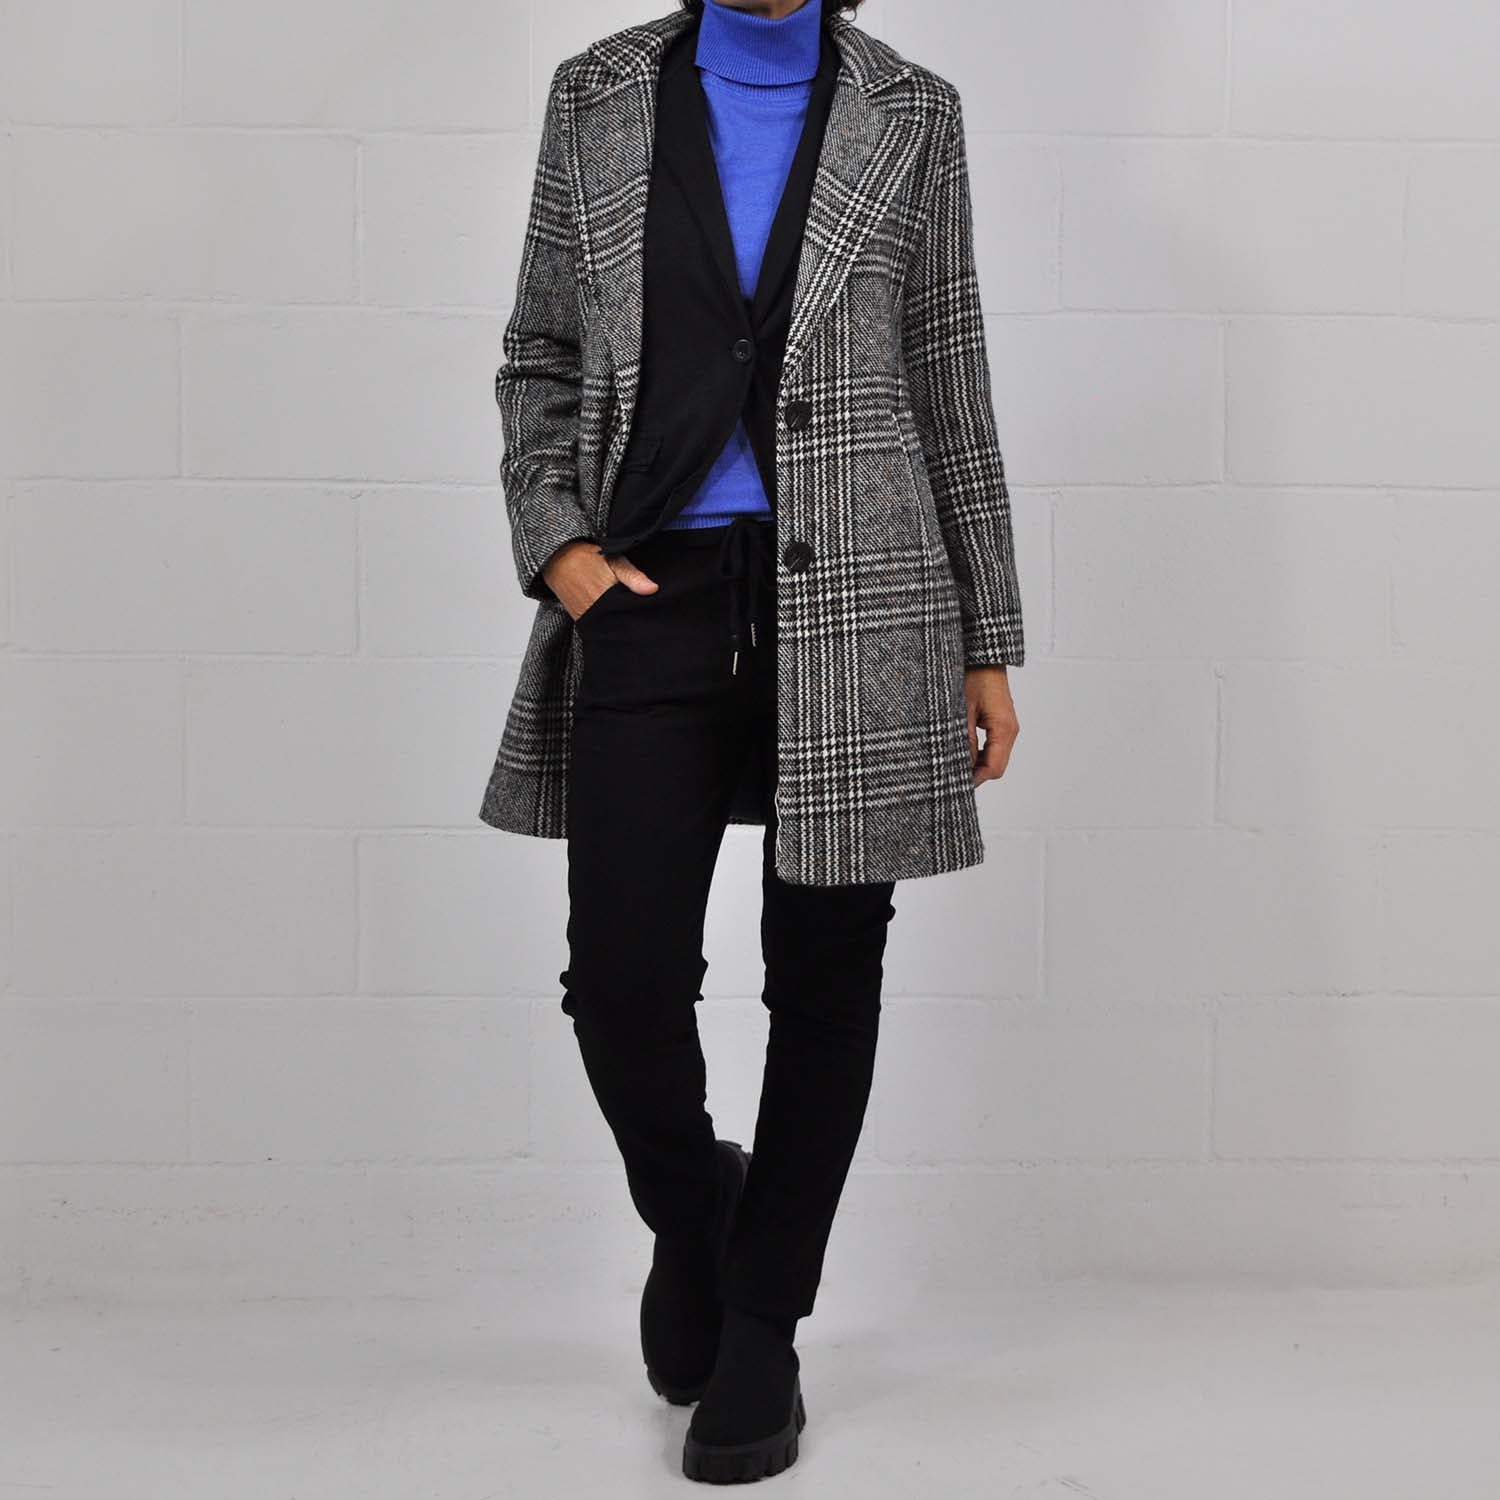 Brown checked coat